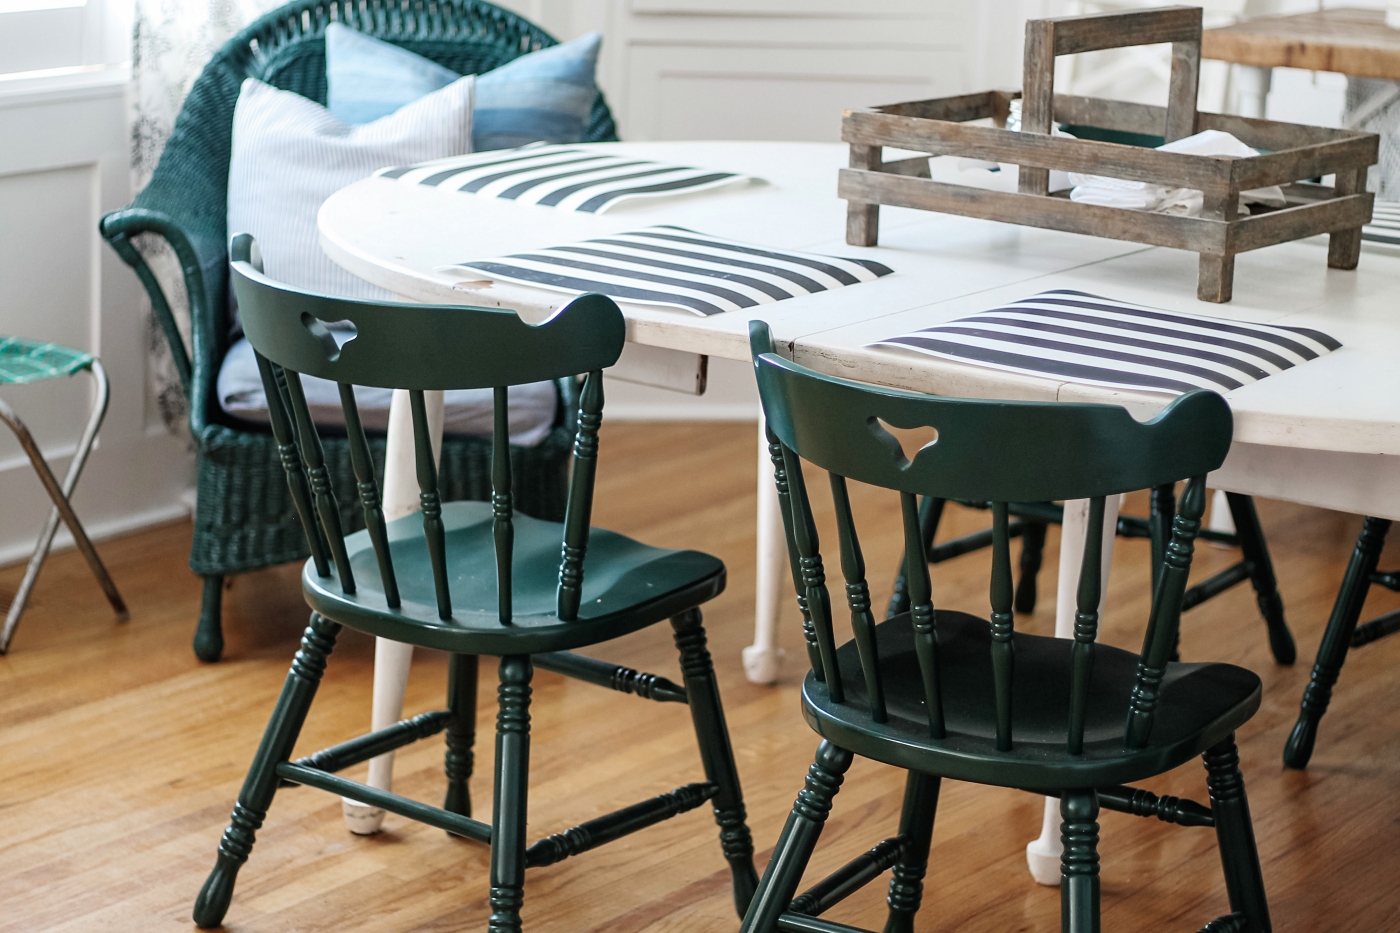 Painting Wicker and Dining Room Chairs Hunter Green - The Wicker House